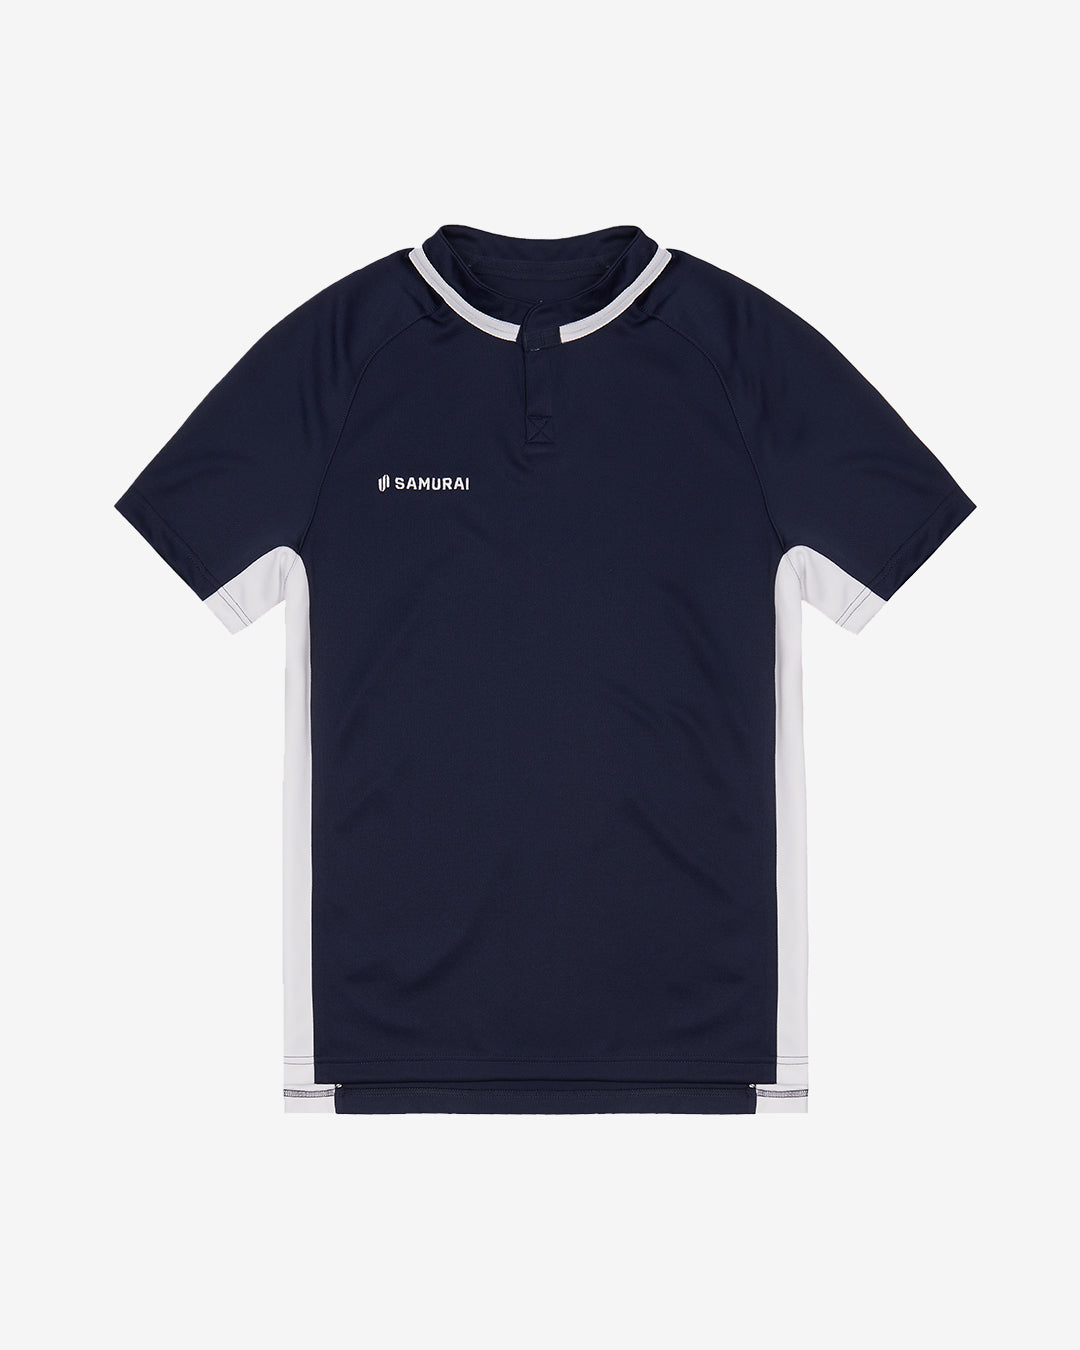 EP:0109 - Rugby Training Jersey - Navy